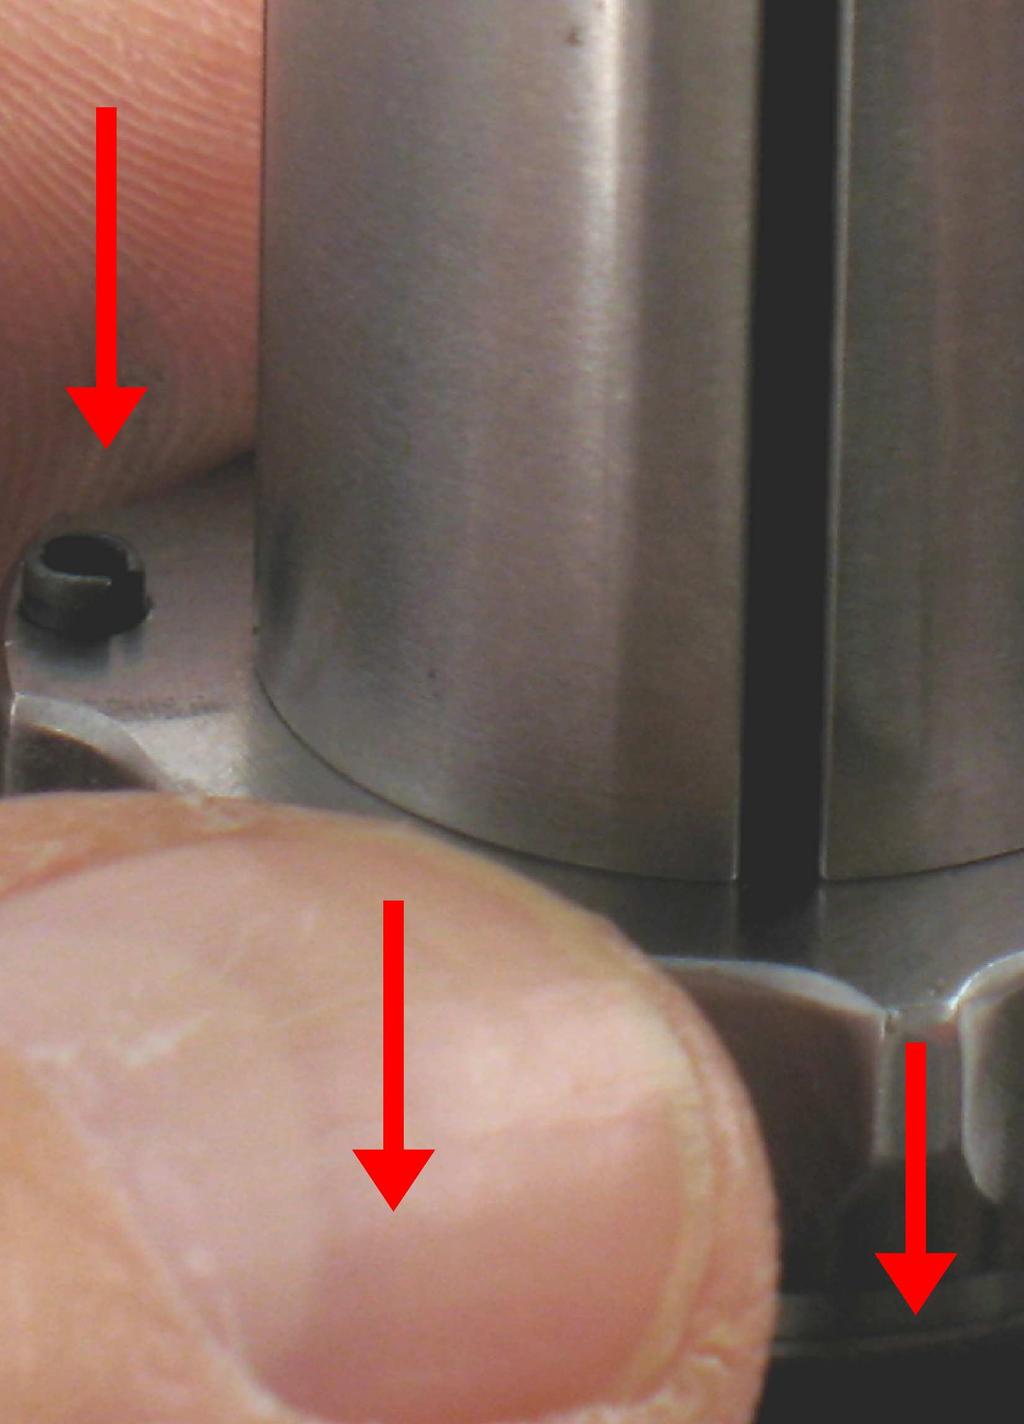 Check the clearance between the rotor and plate. Use a.001" (~0.03 mm) thick feeler gauge.